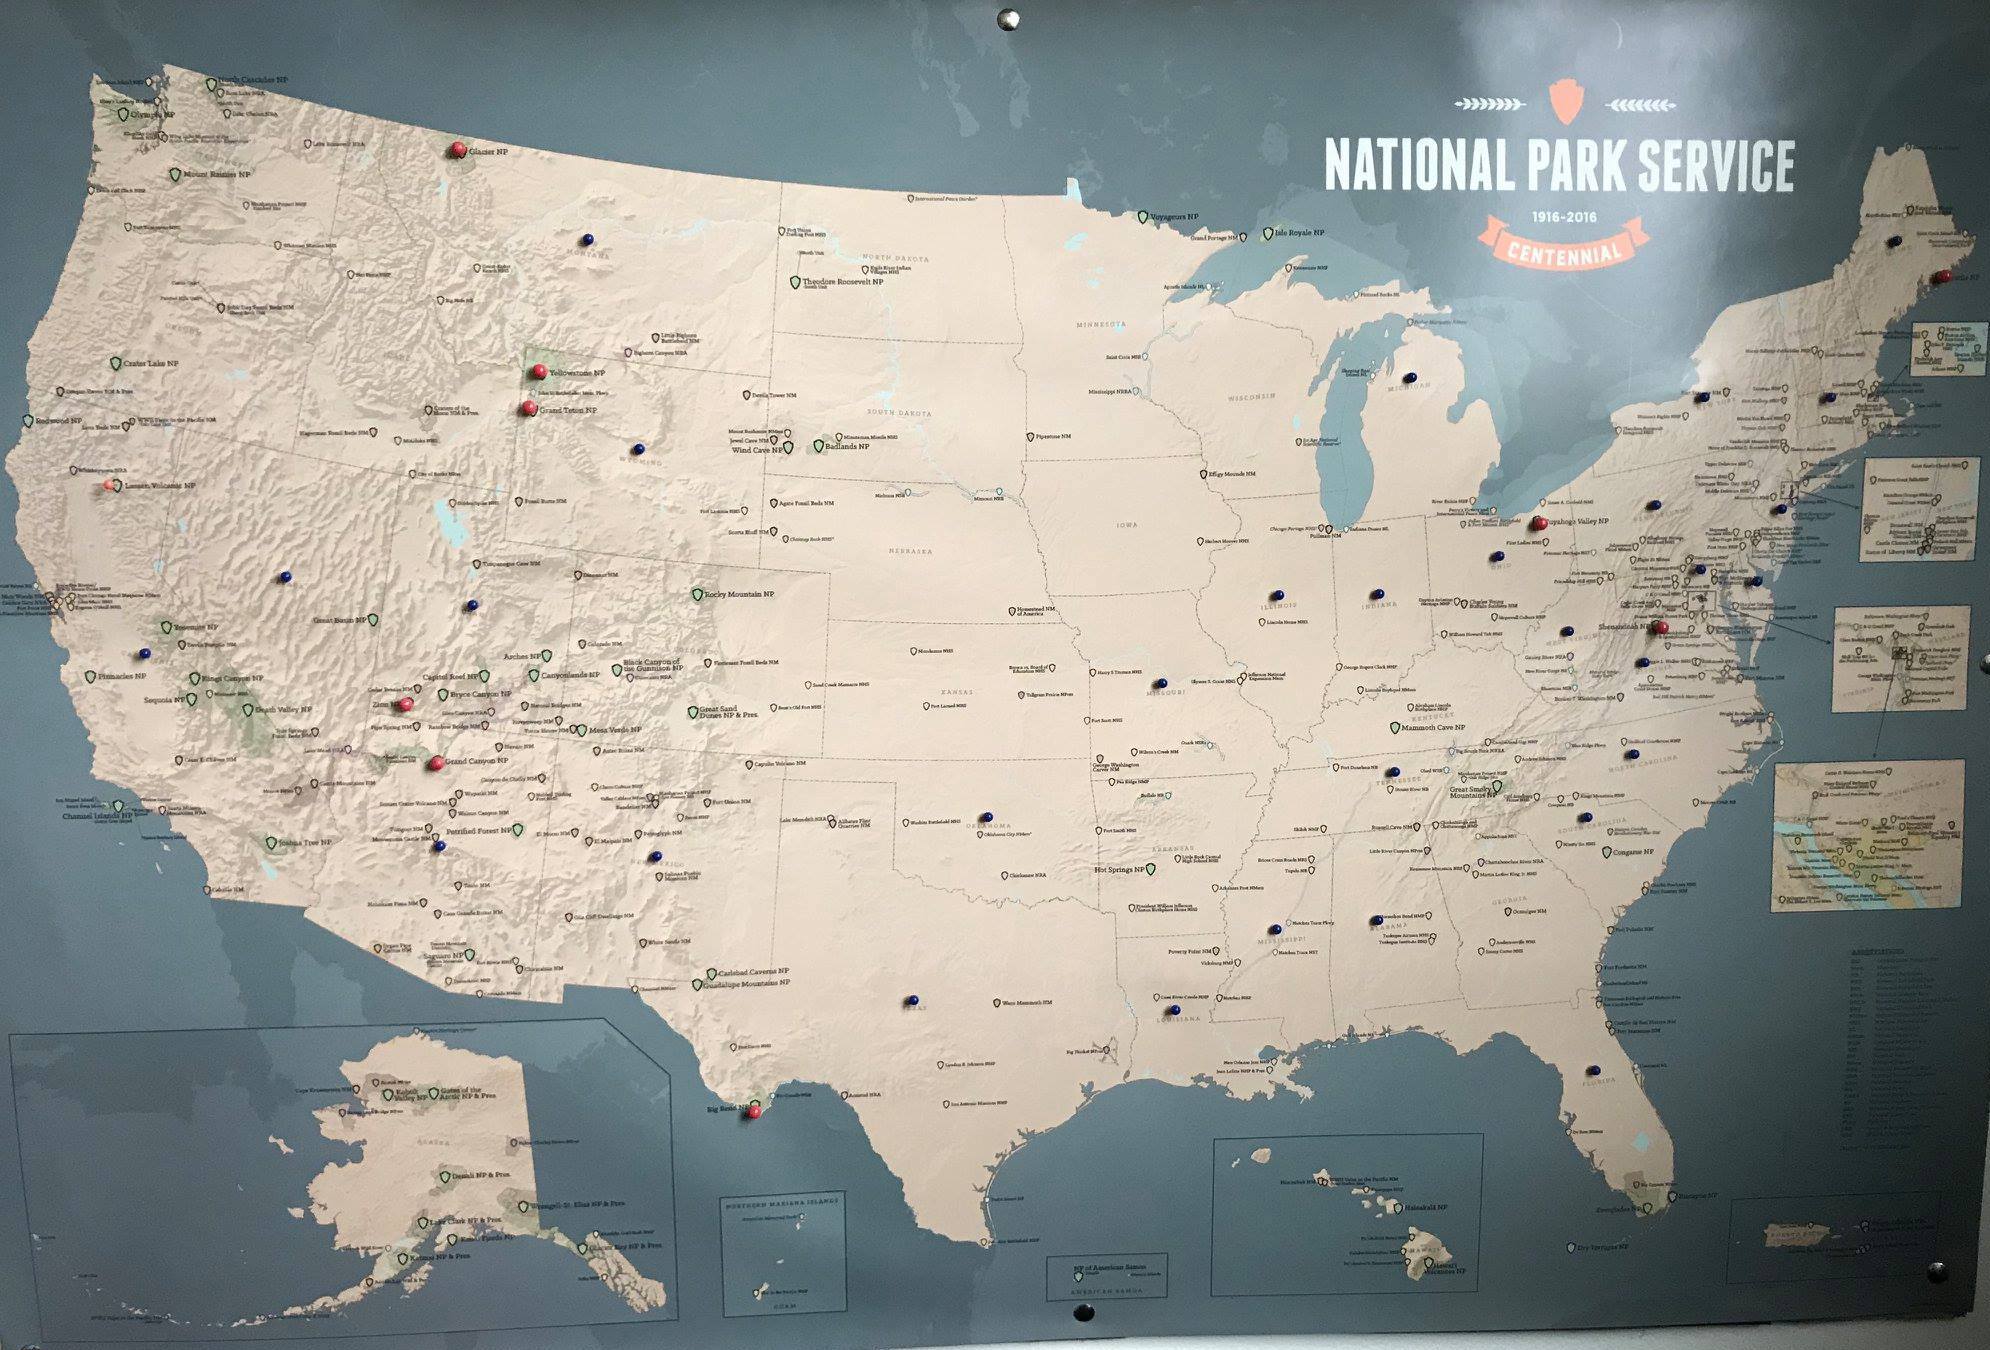 States and National parks I visited